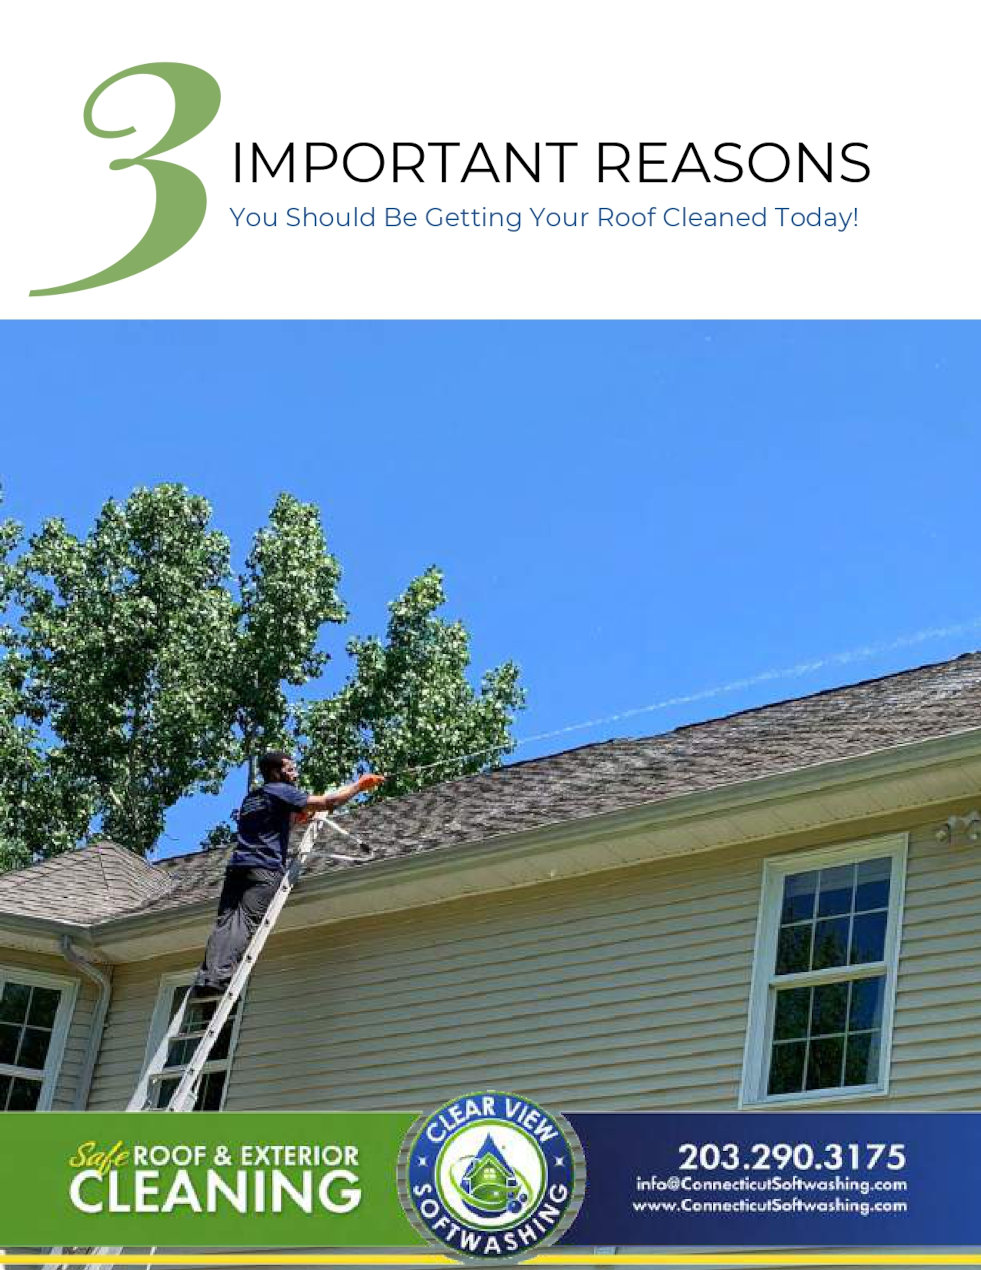 Roof Cleaning Specials